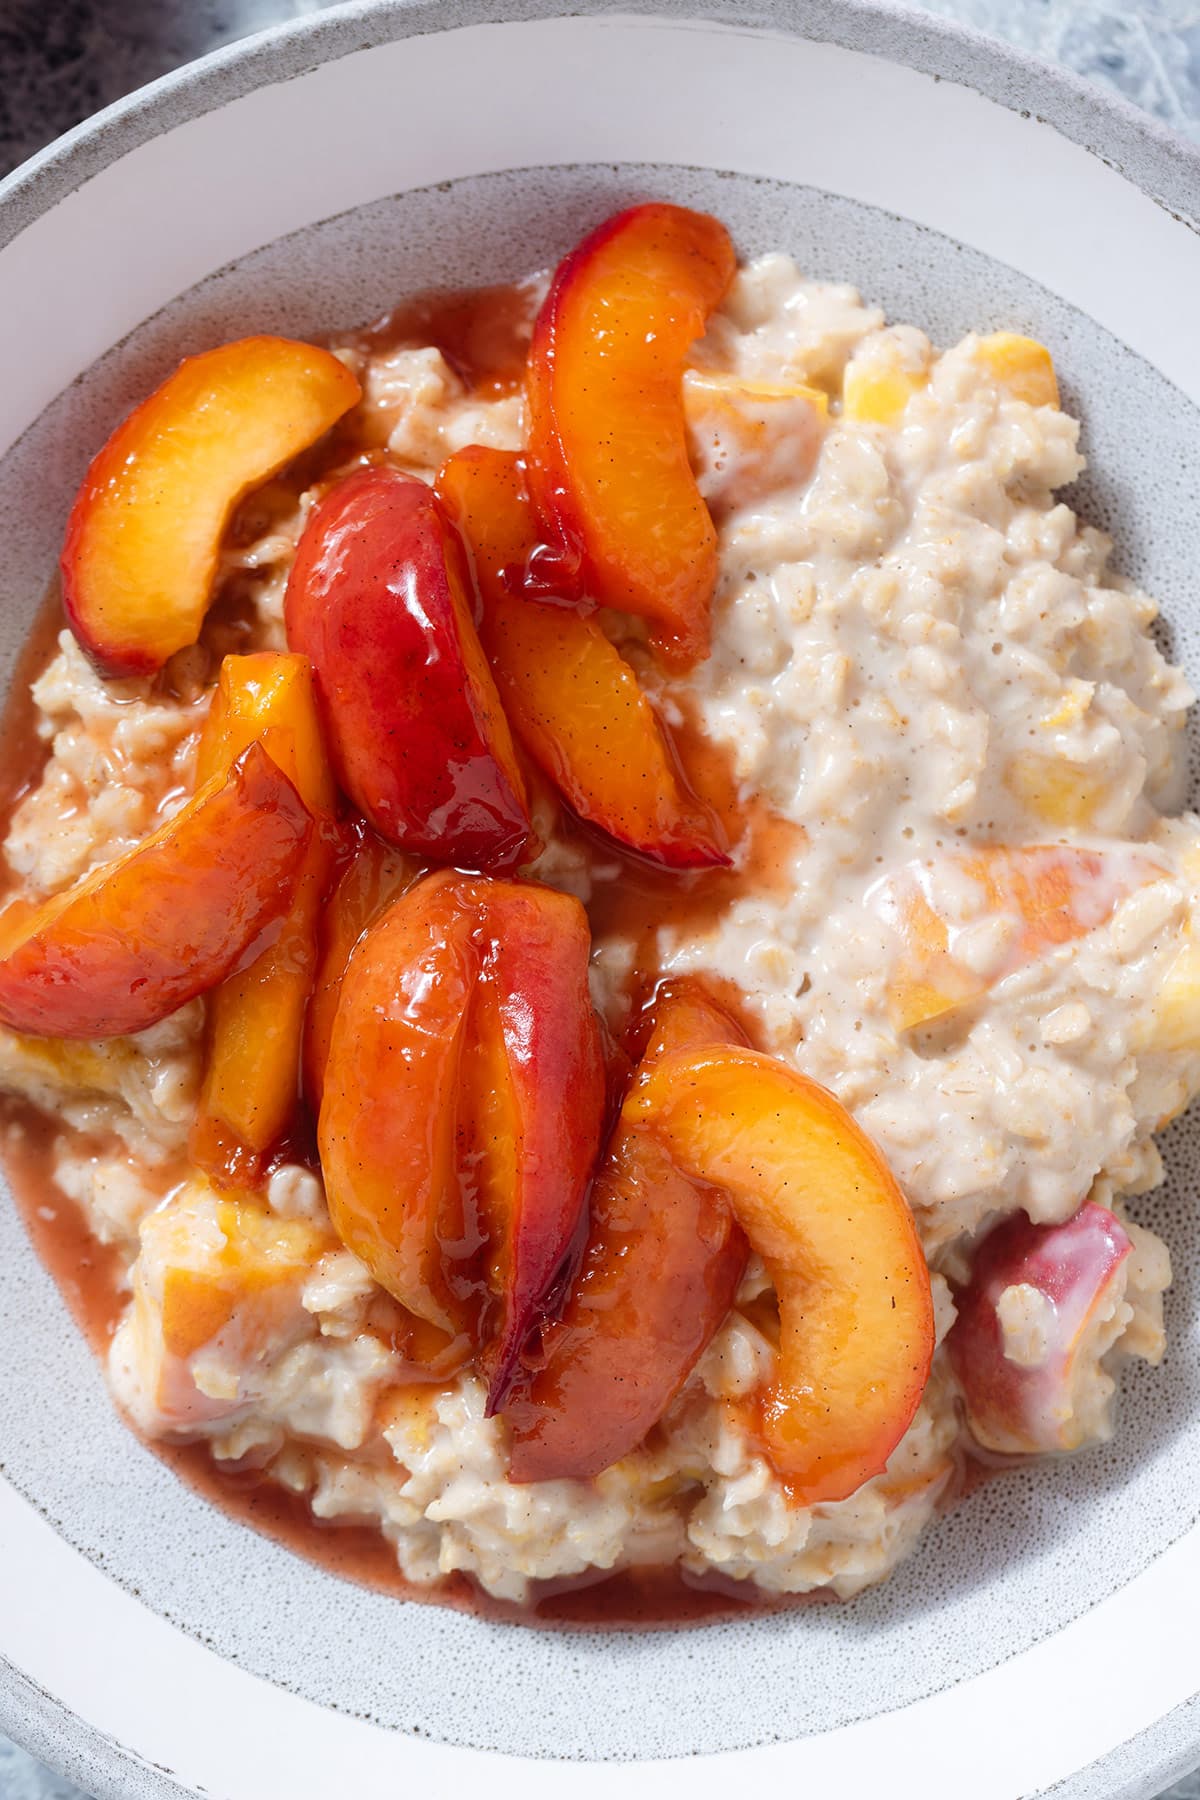 Peach oatmeal with caramelized peaches on top in a a grey bowl.